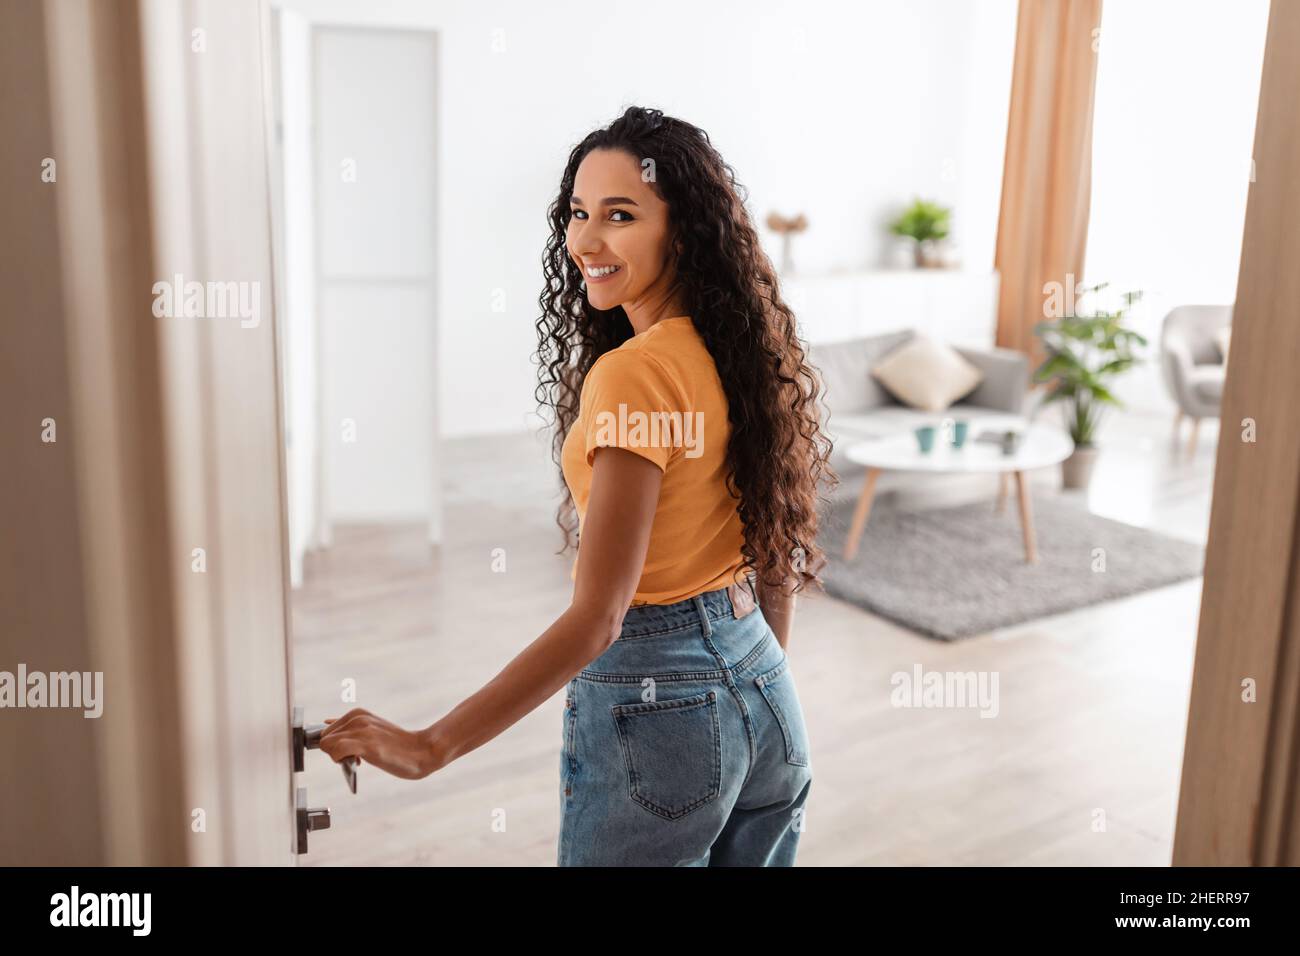 Back view of excited young woman walking in apartment Stock Photo